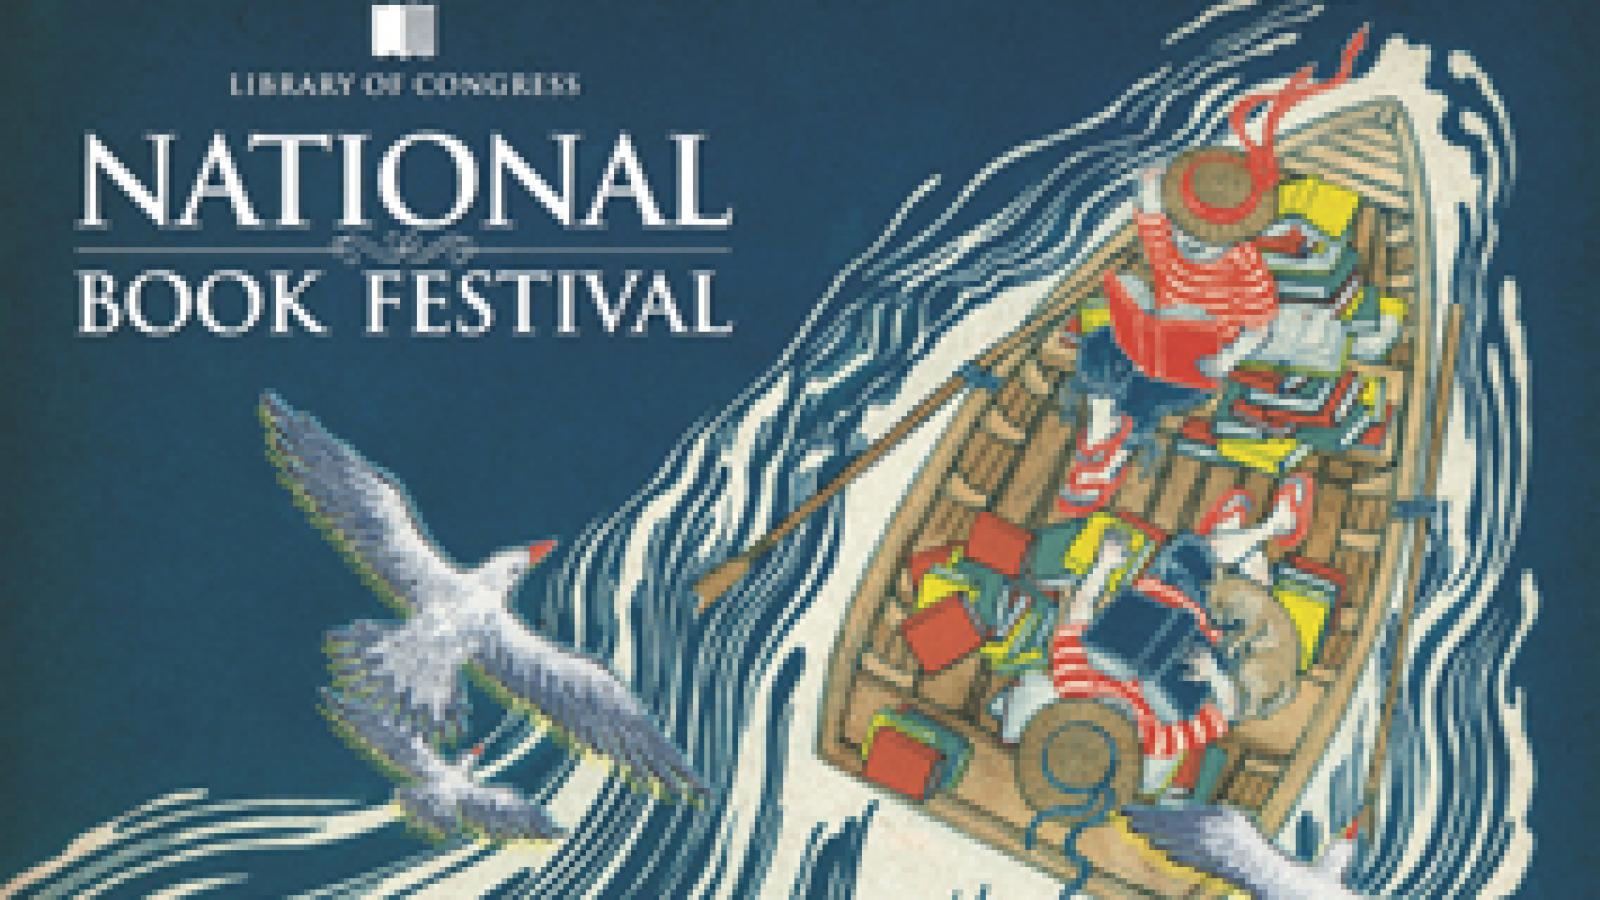 Festival poster with two people in a boat surrounded by books with birds flying above